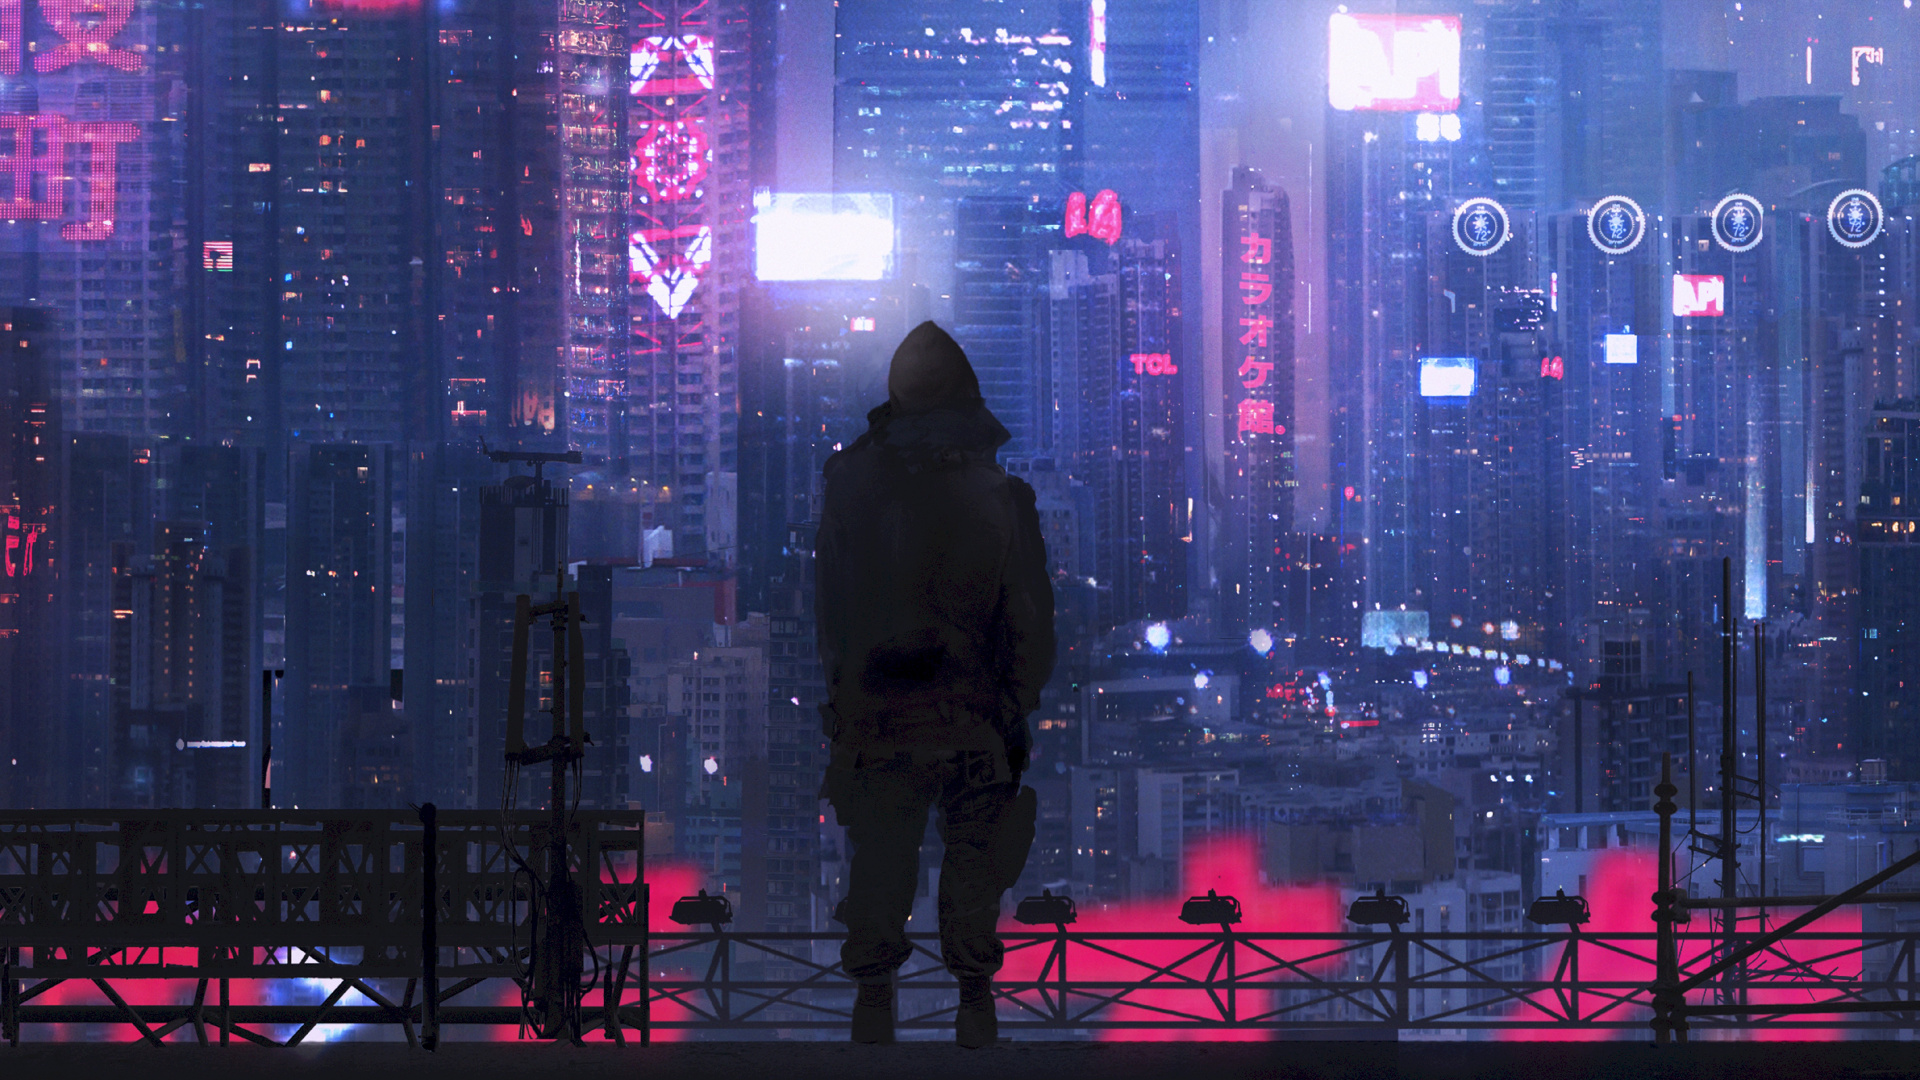 Man in Black Hoodie Standing on The Top of The Building During Night Time. Wallpaper in 1920x1080 Resolution